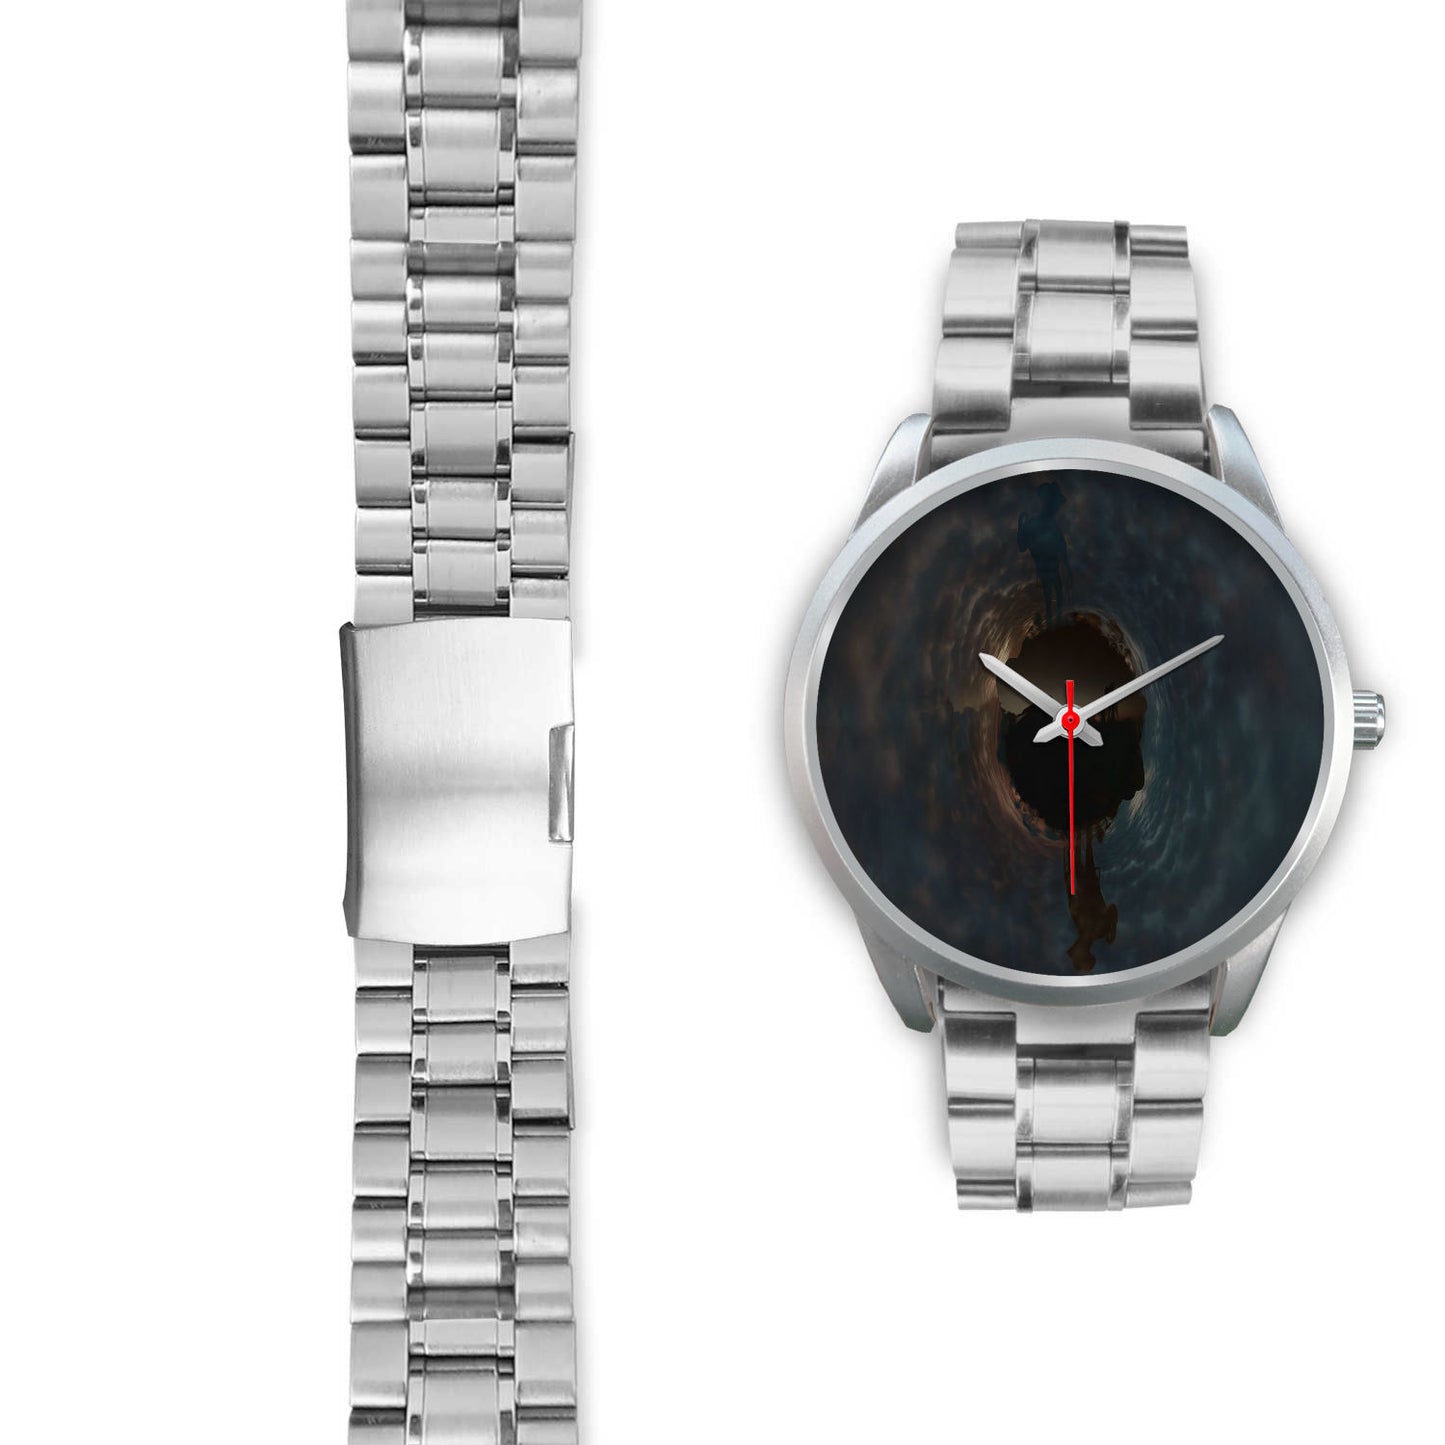 SILVER WATCH - THE RINGER I - LIVINGARTLIFESTYLE - GIFT IDEA - CHRISTMAS PRESENT